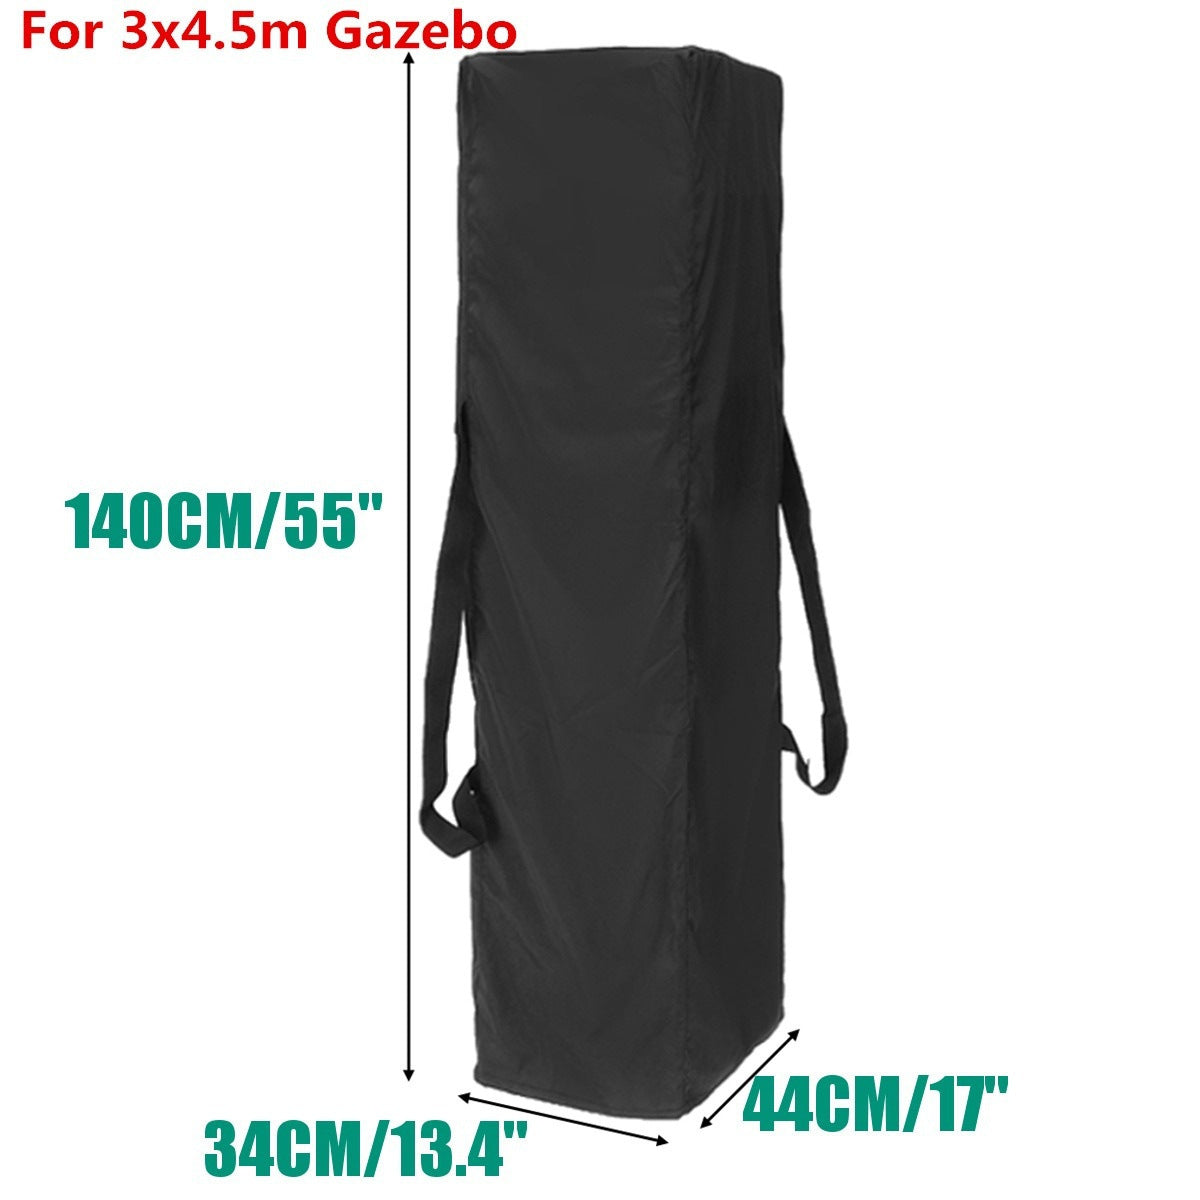 Black Waterproof Cover Dustproof Sunscreen Canopy Tent Storage Bag With Drawstring And Two Carrying Straps